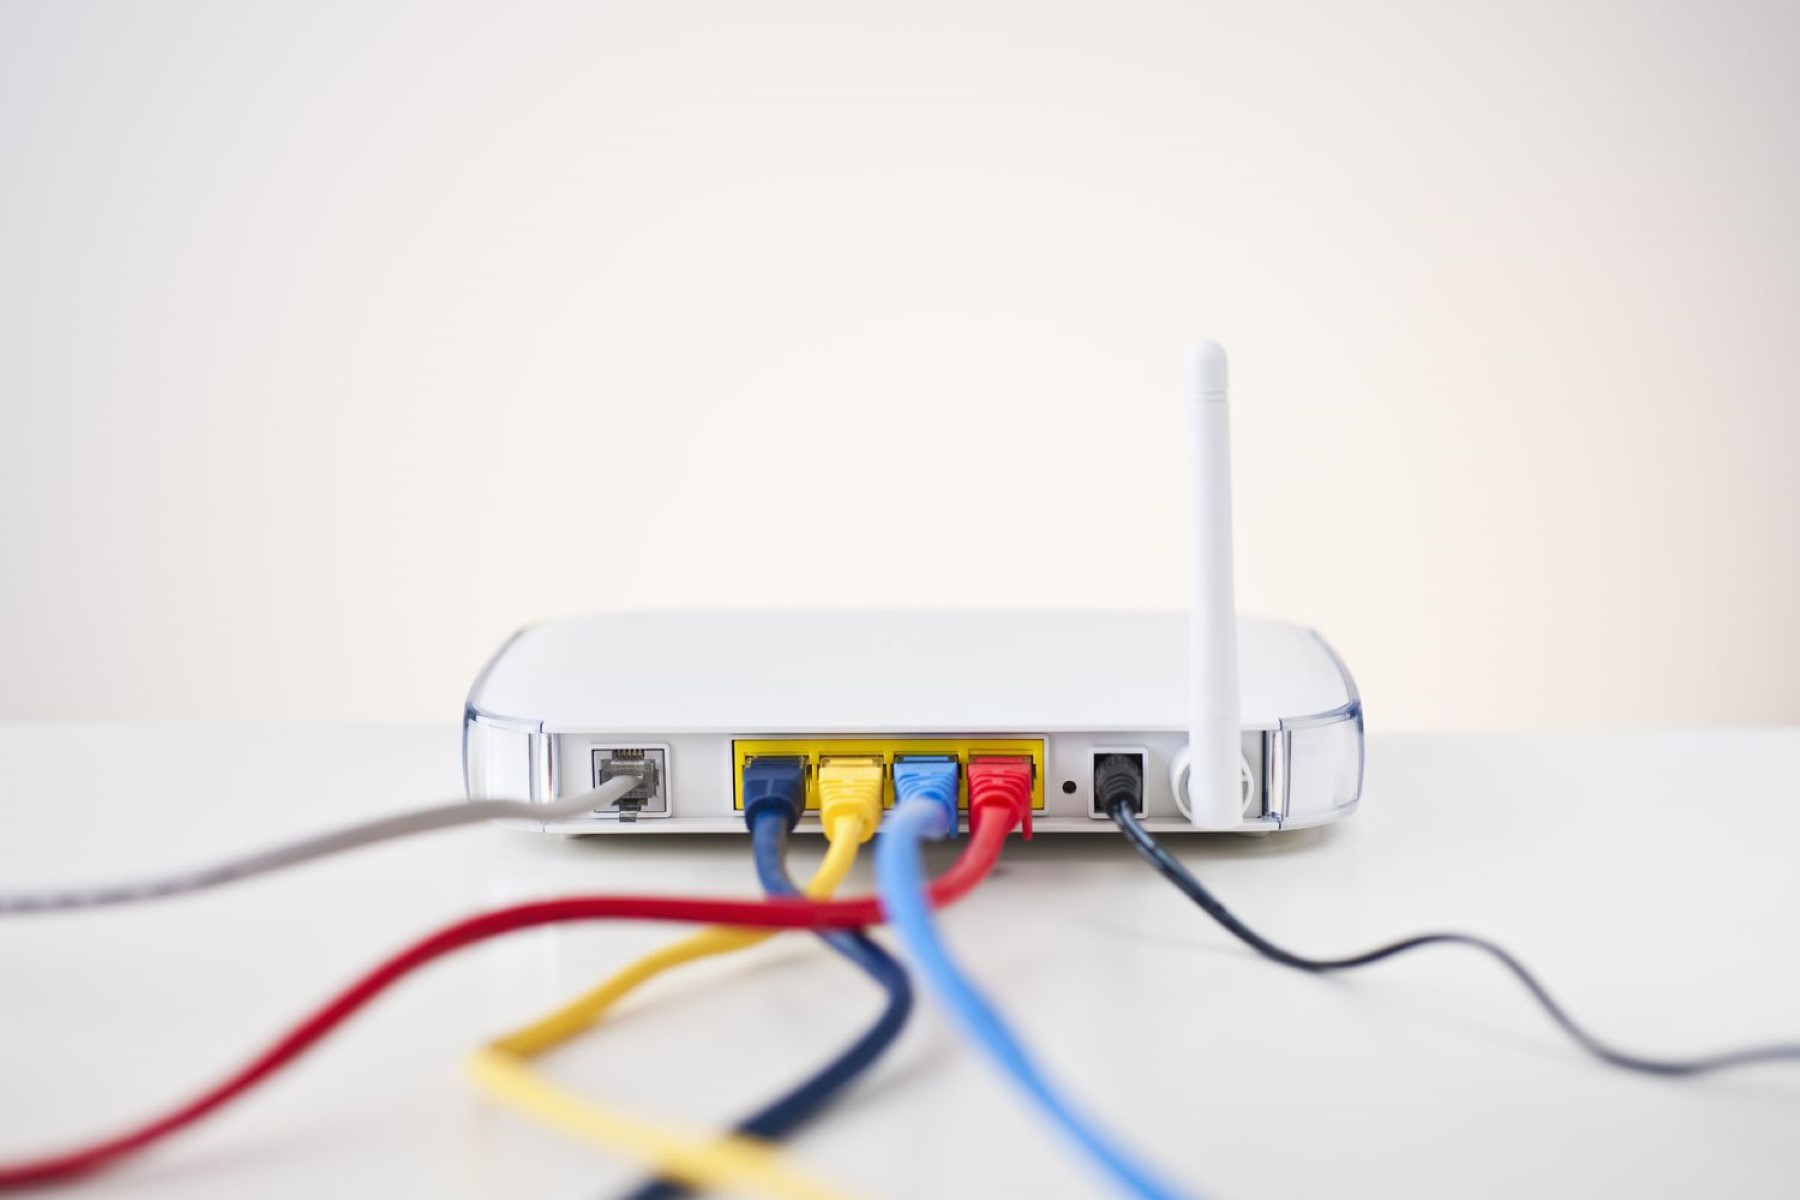 How To Set Up Firewall On Router